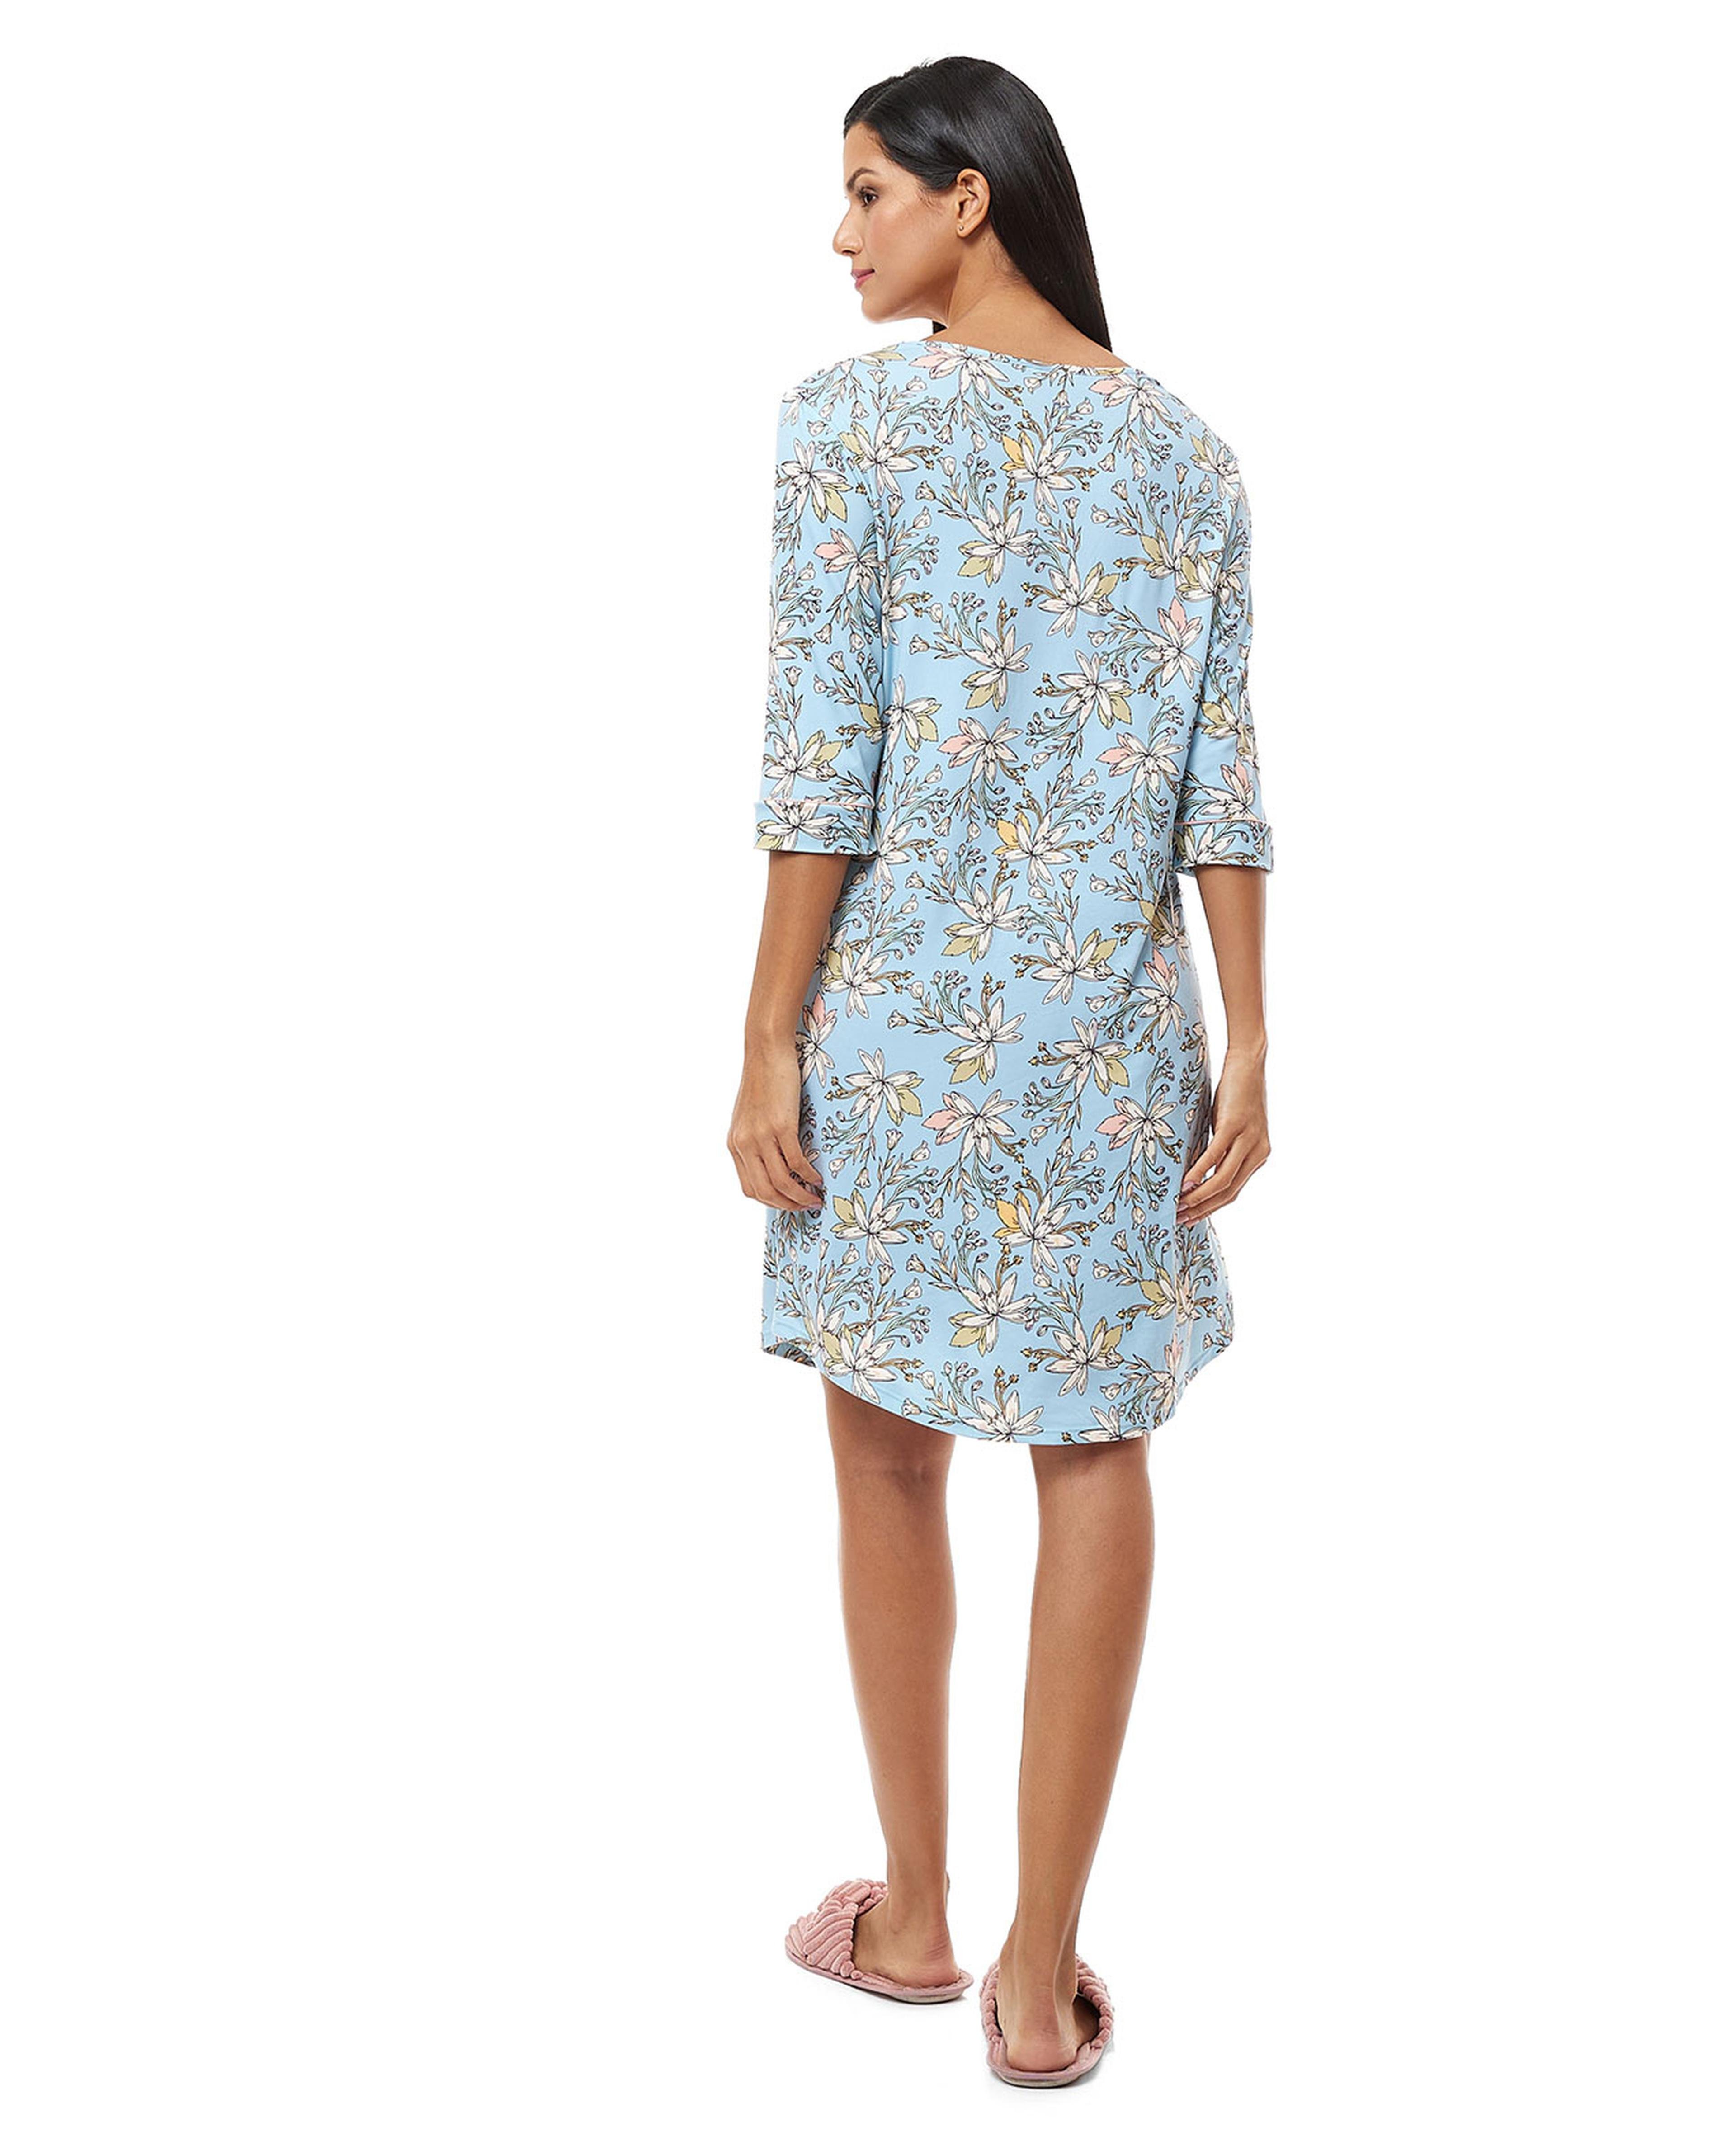 Patterned Nightdress with 3/4 Sleeves